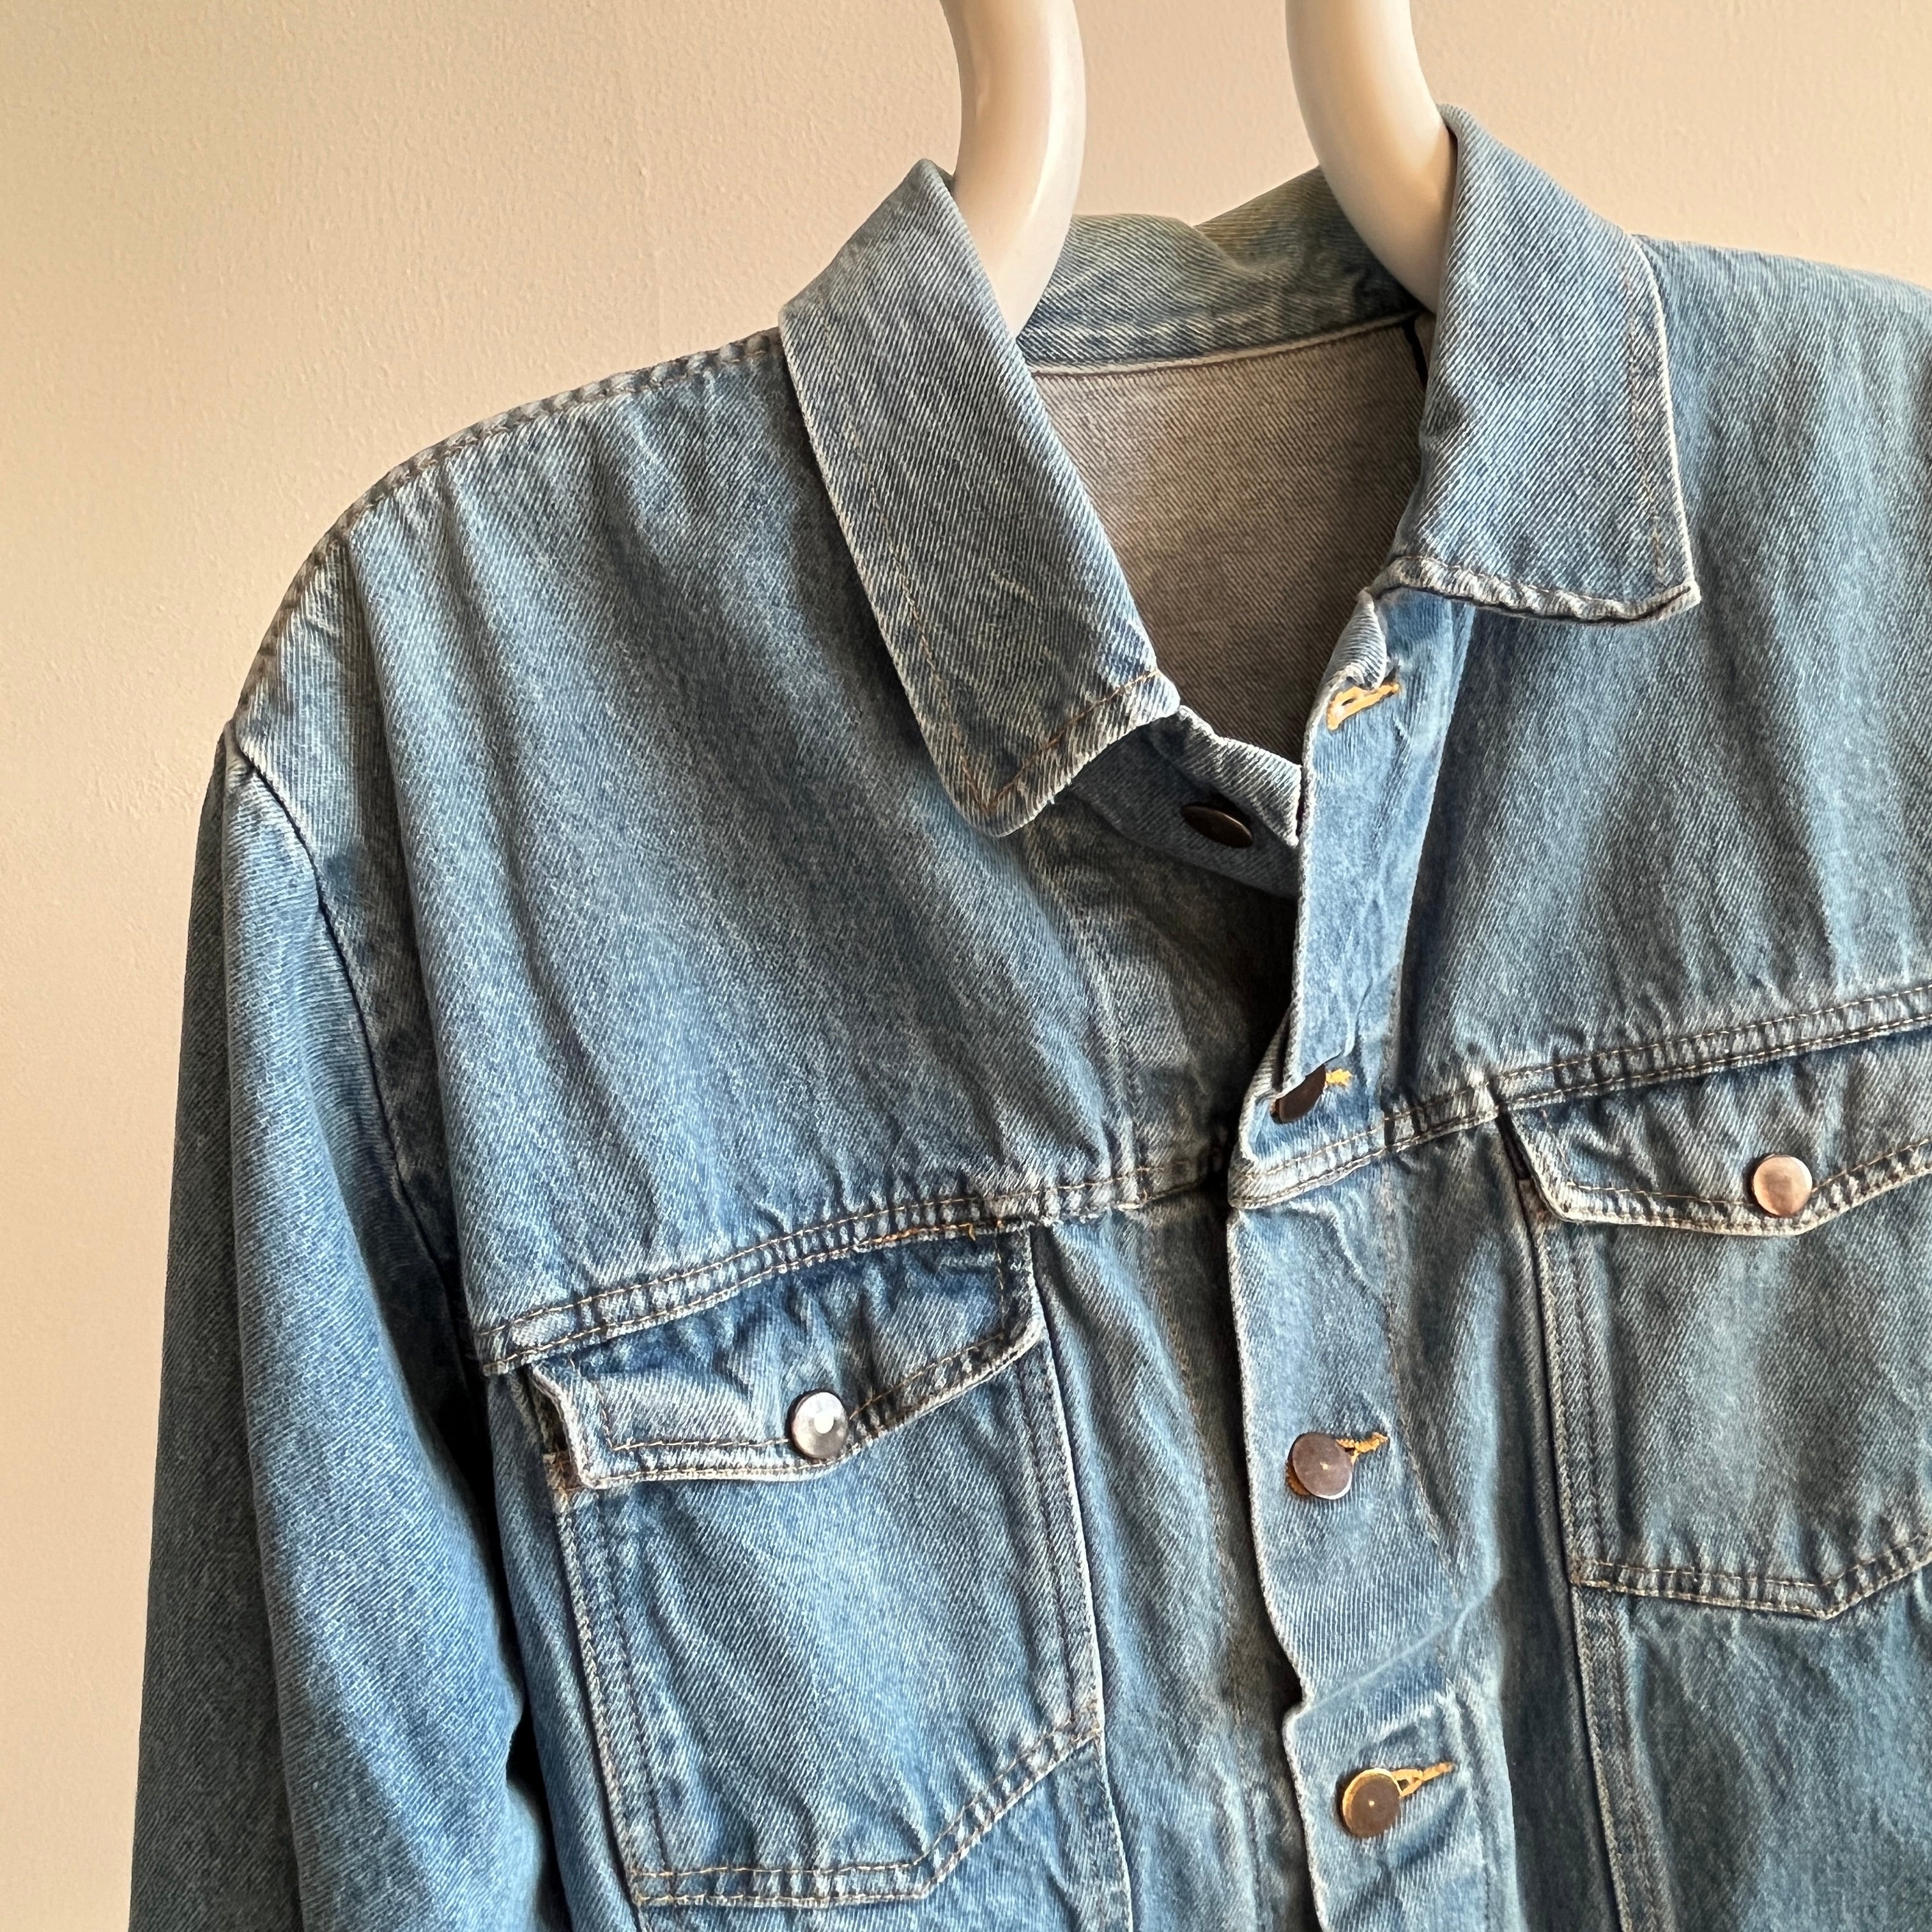 1980s Soft Light Wash Denim Jean Jacket with a Cool Bleach Stain